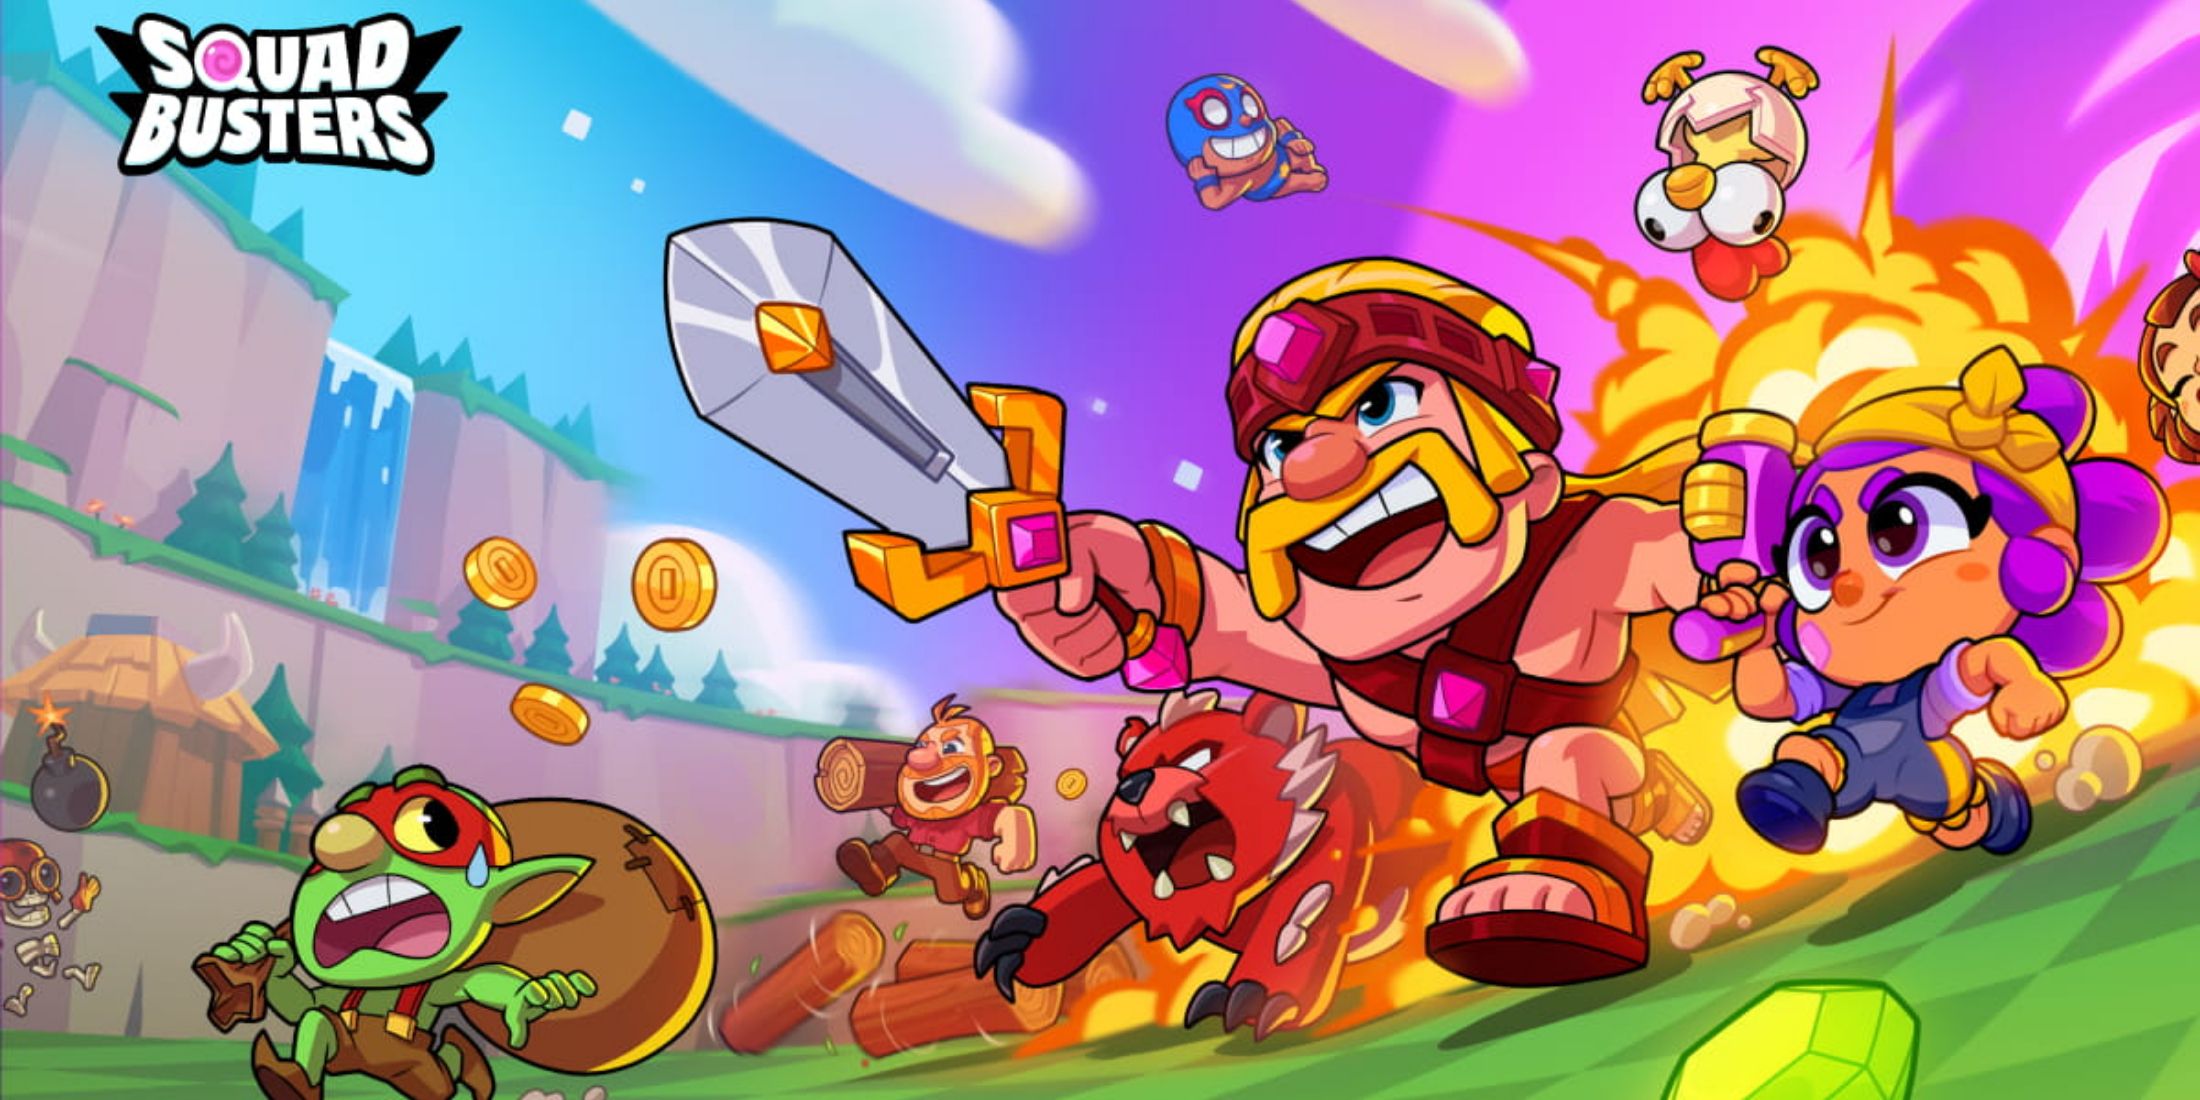 The cover image for Squad Busters showing characters running together